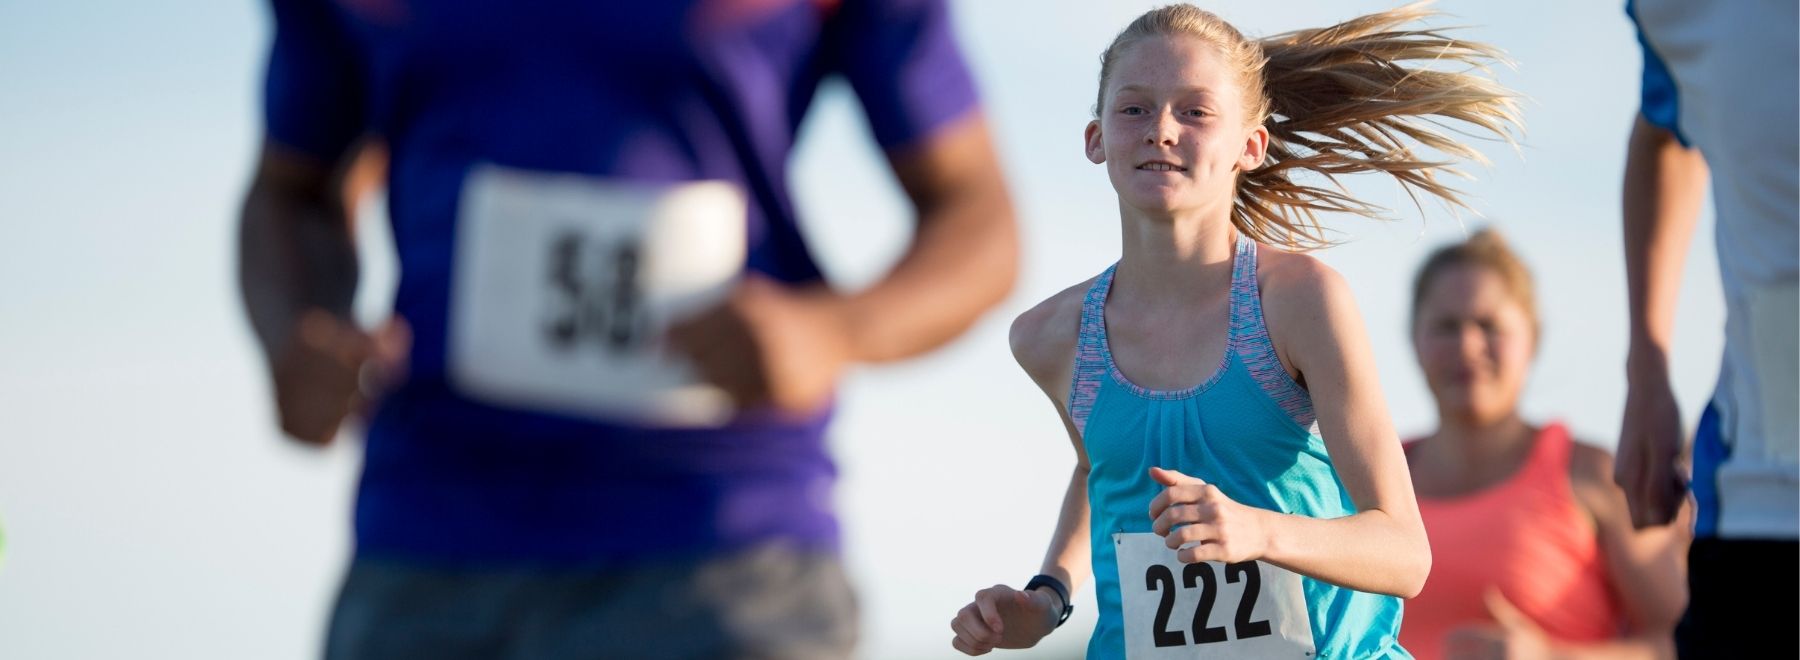 young woman running a 5K